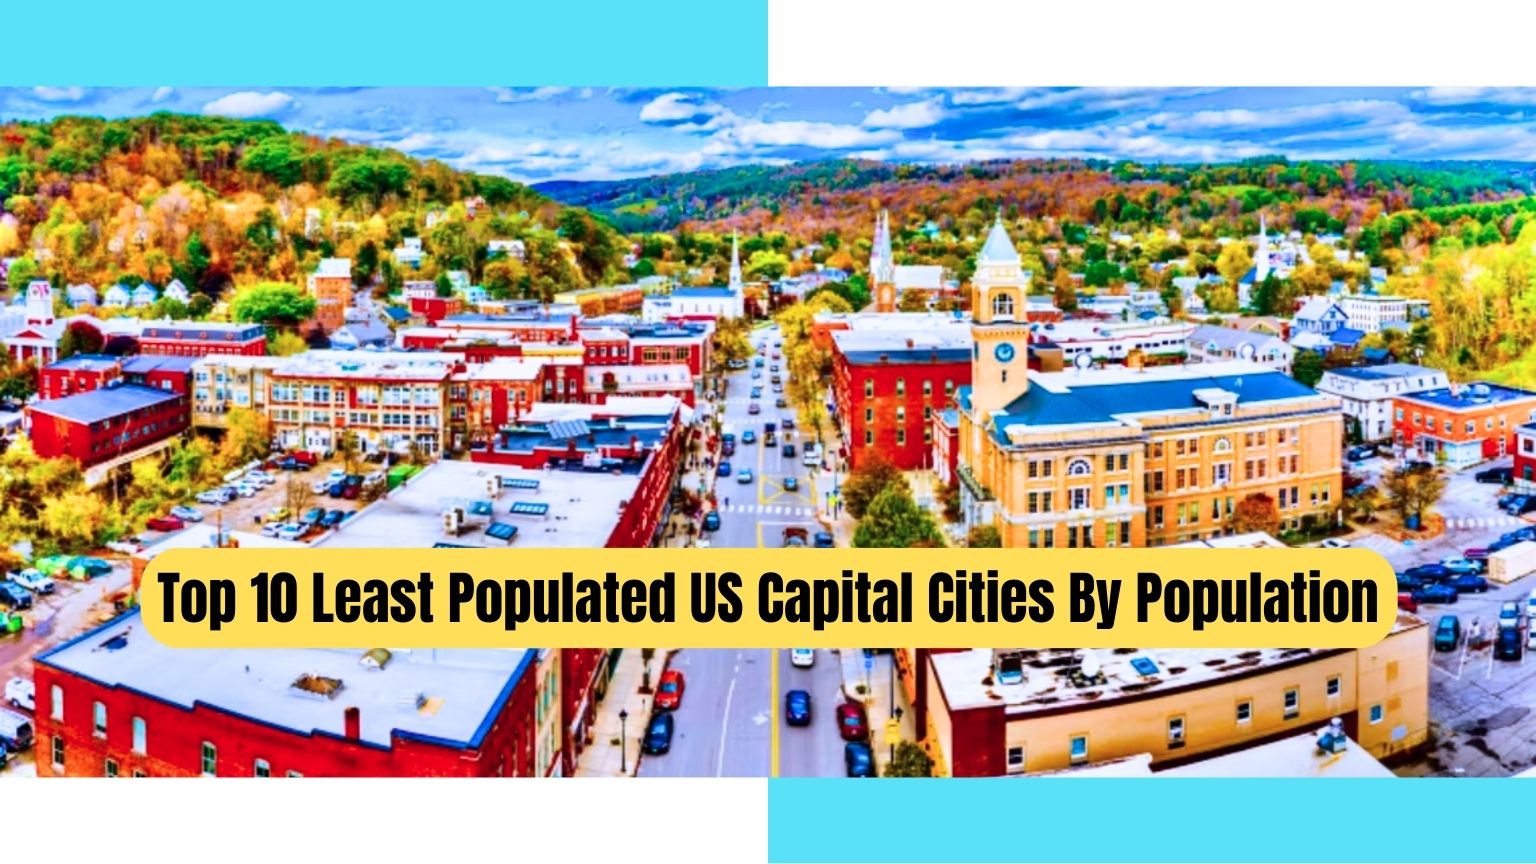 Top 10 least populated us capital cities, Least populated us capital cities by population, Top 10 Least populated us capital cities by population,